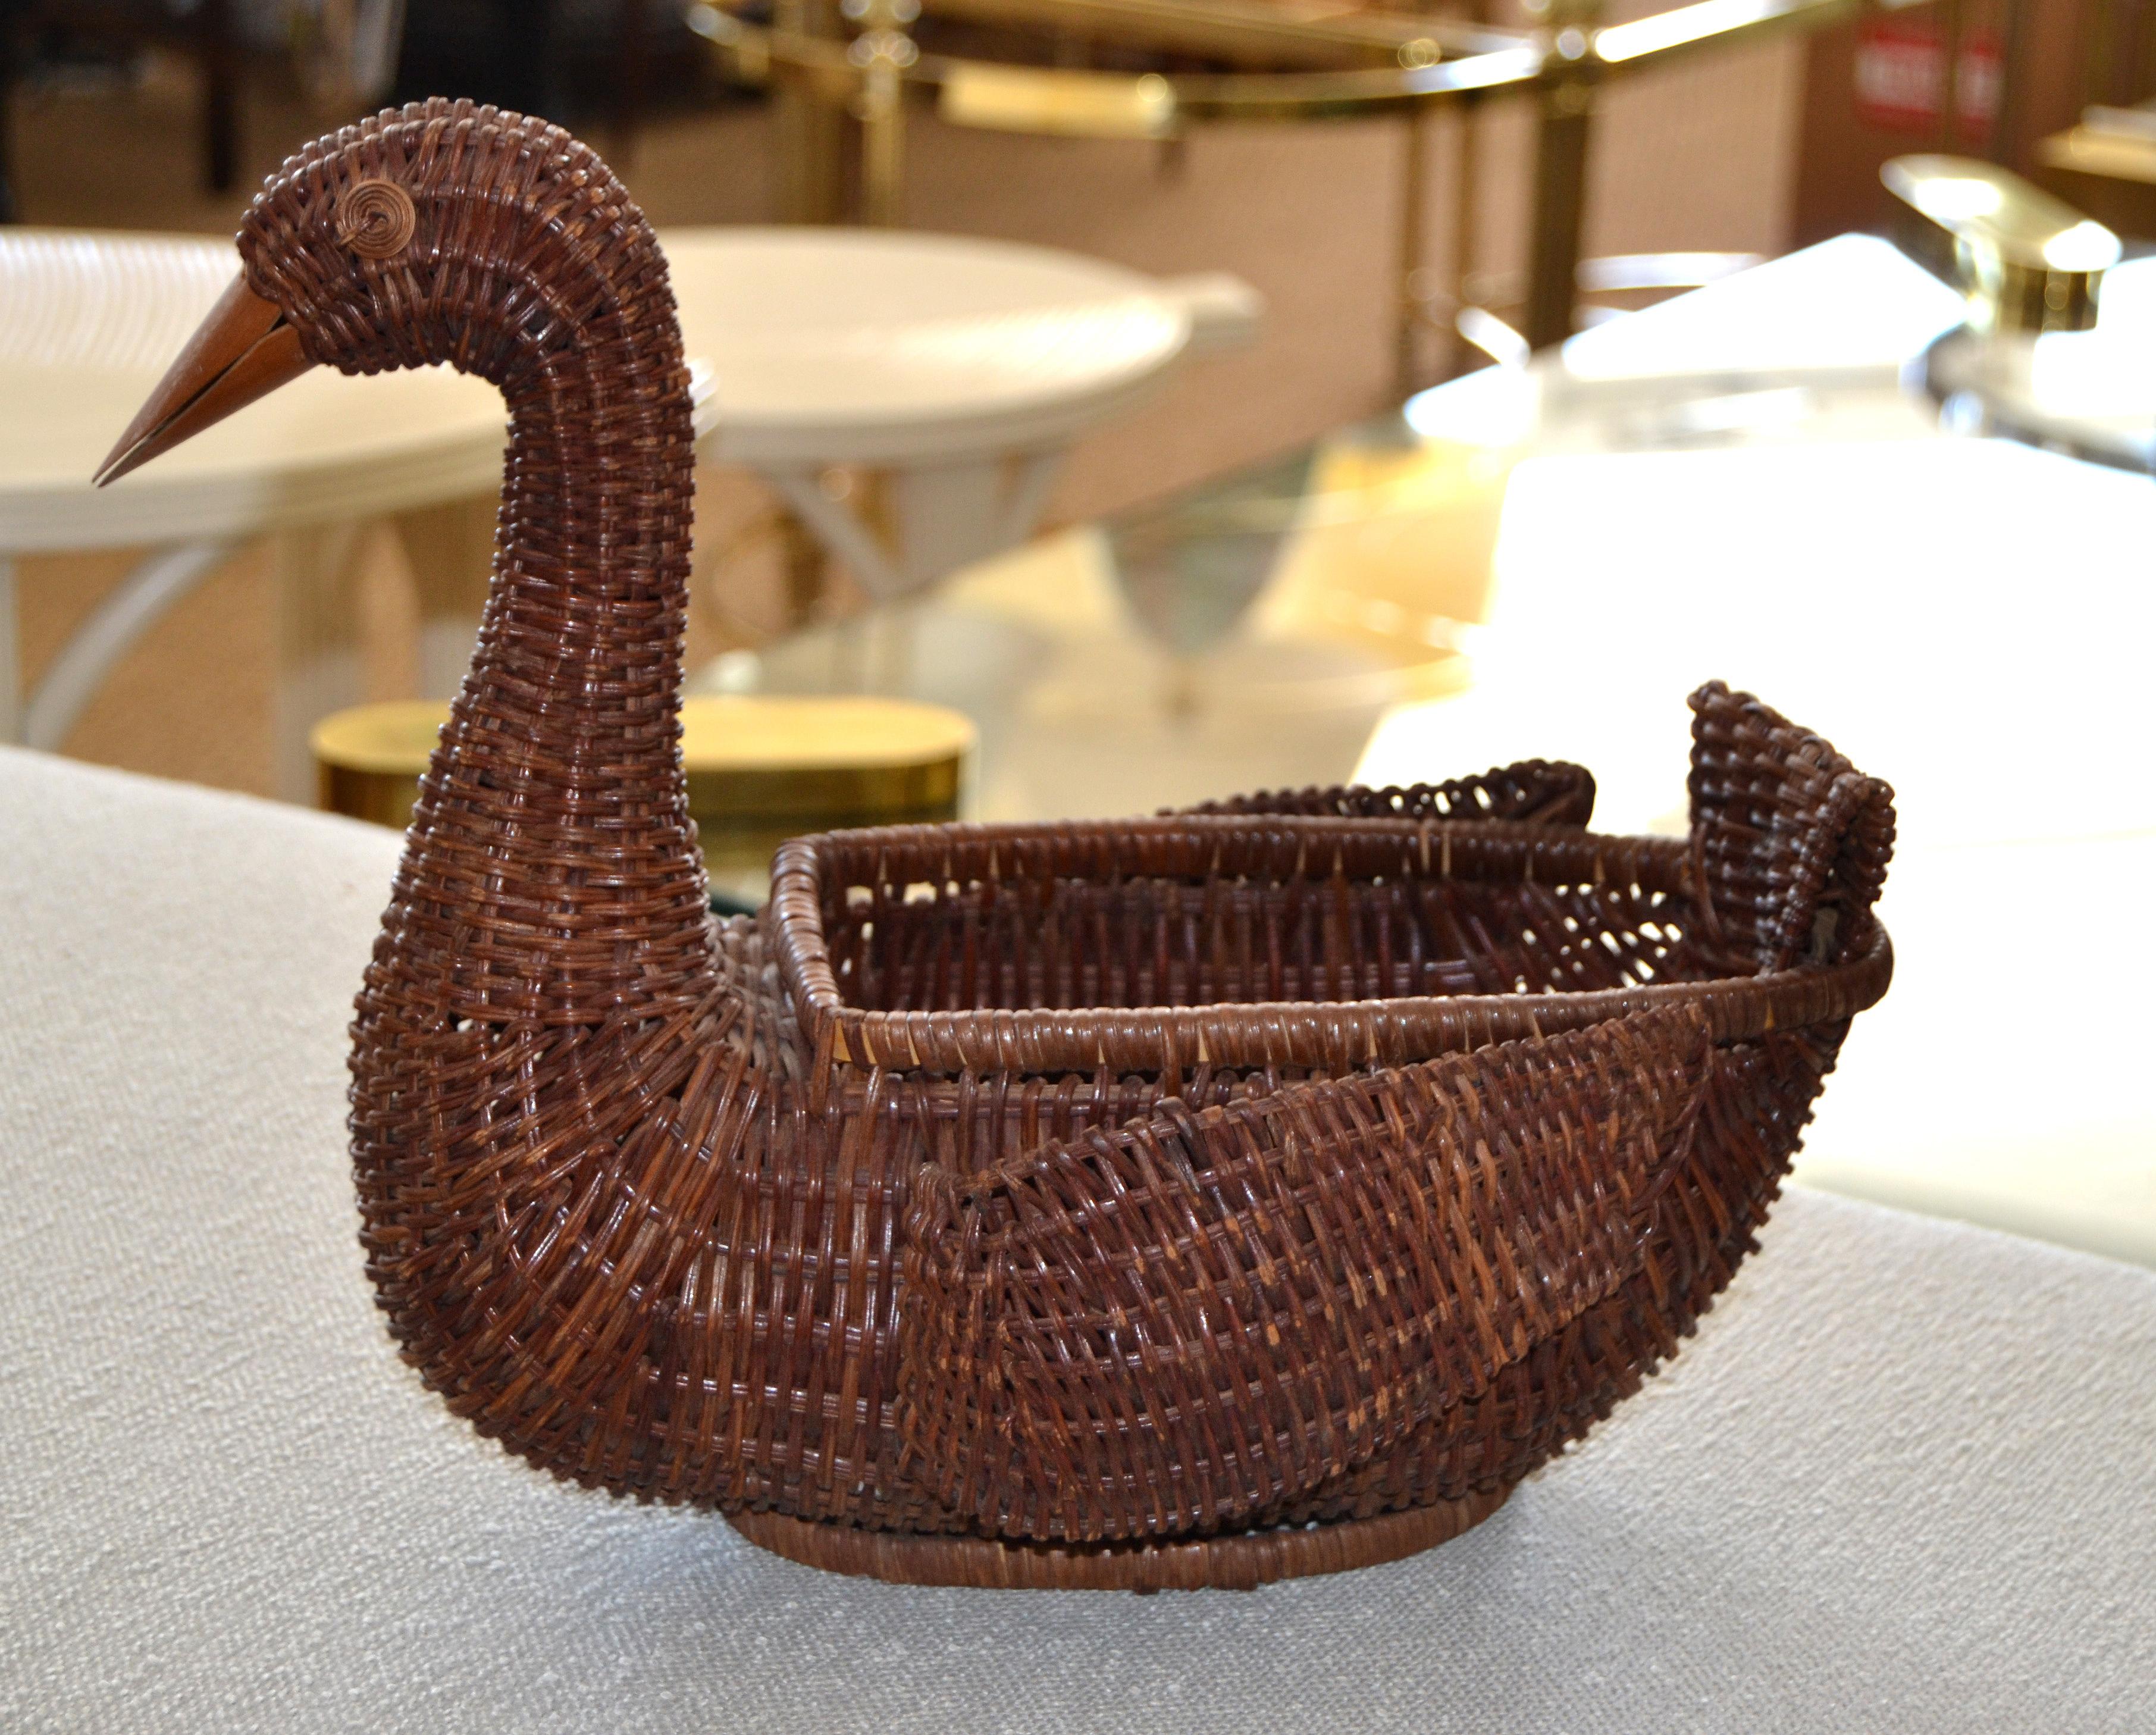 Boho Chic Decorative Handcrafted Woven Reed Brown Duck Basket, Animal Sculpture  2